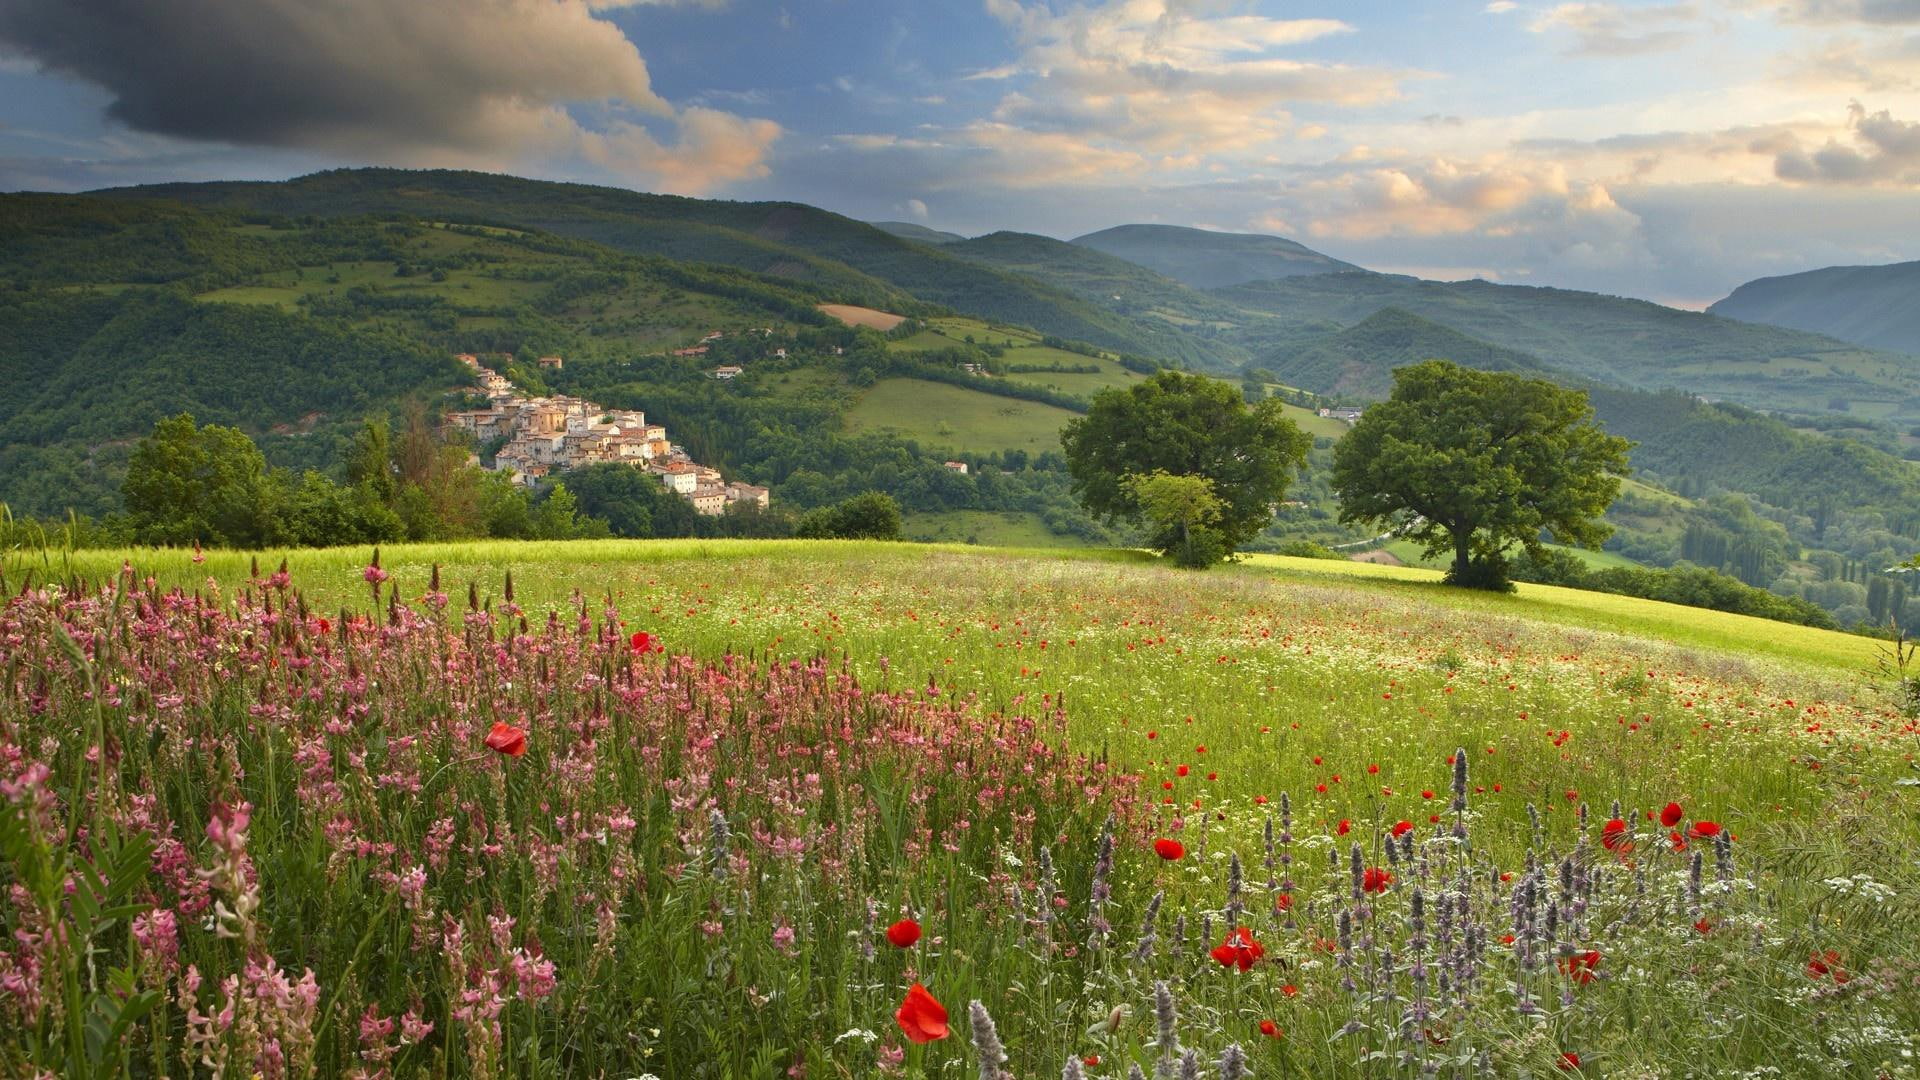 Poppies In The Meadow, flower field with mountain, flowers, landscapes